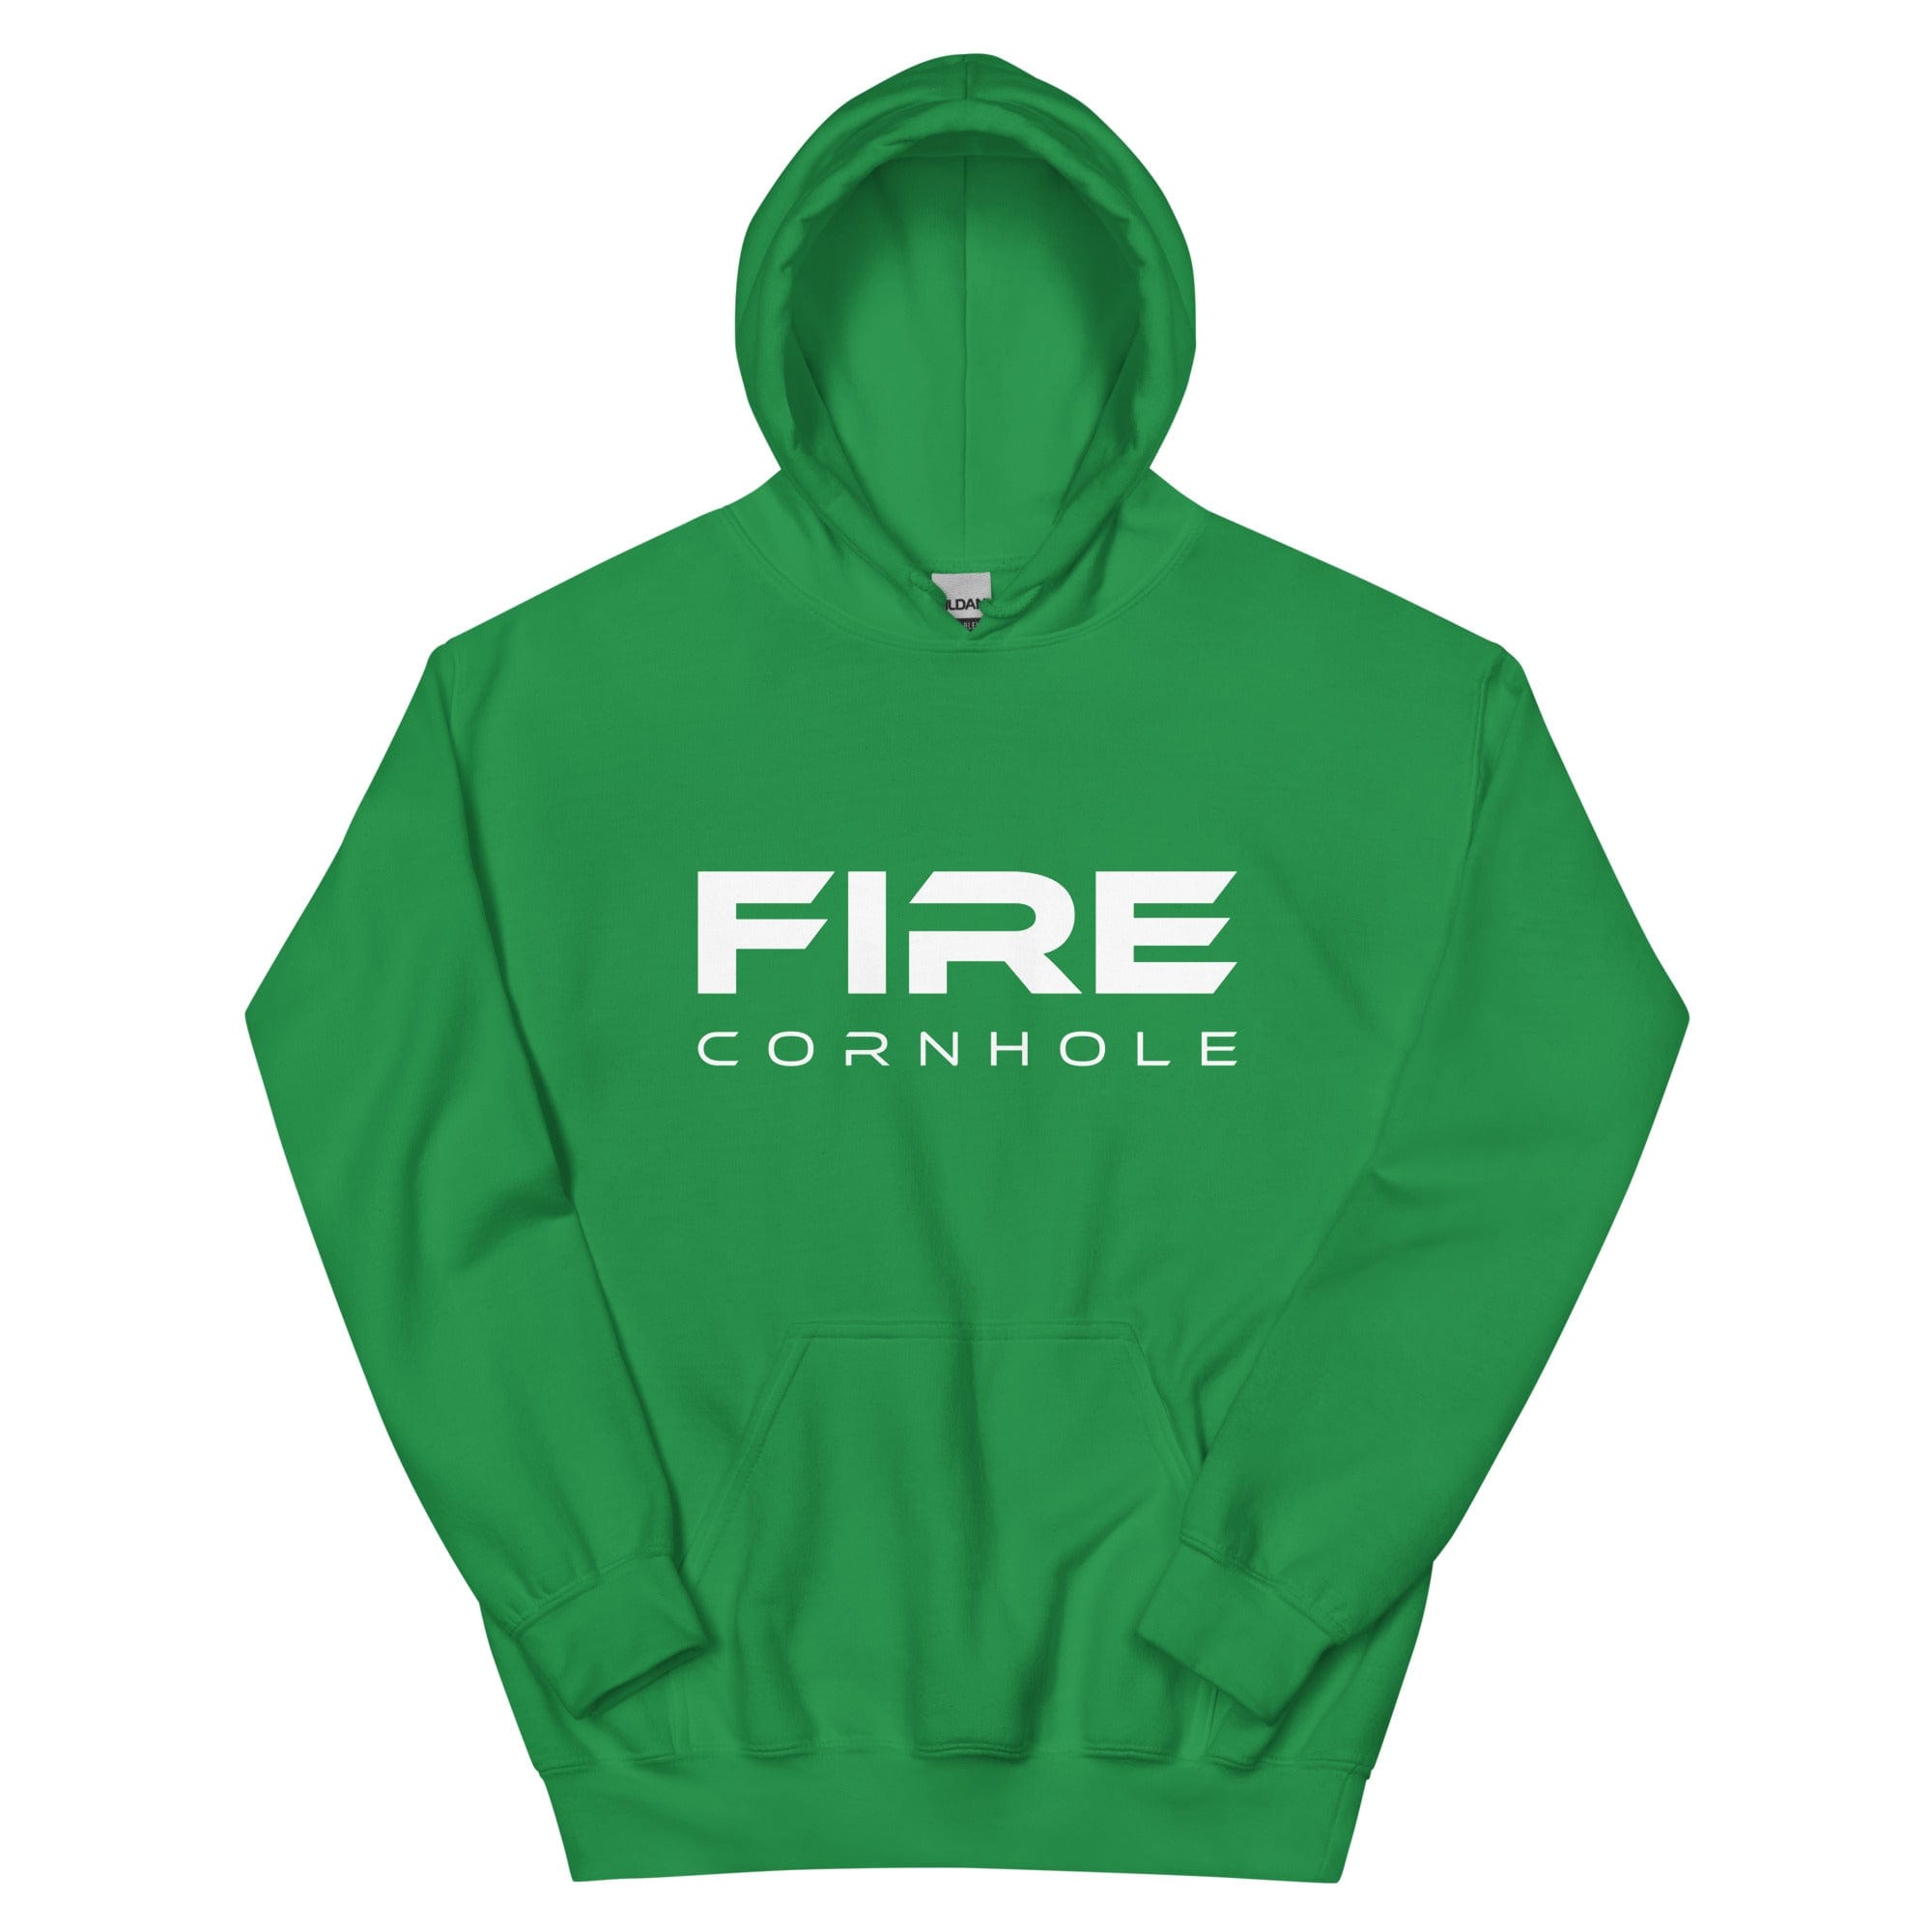 Green unisex cotton hoodie with Fire Cornhole logo in white